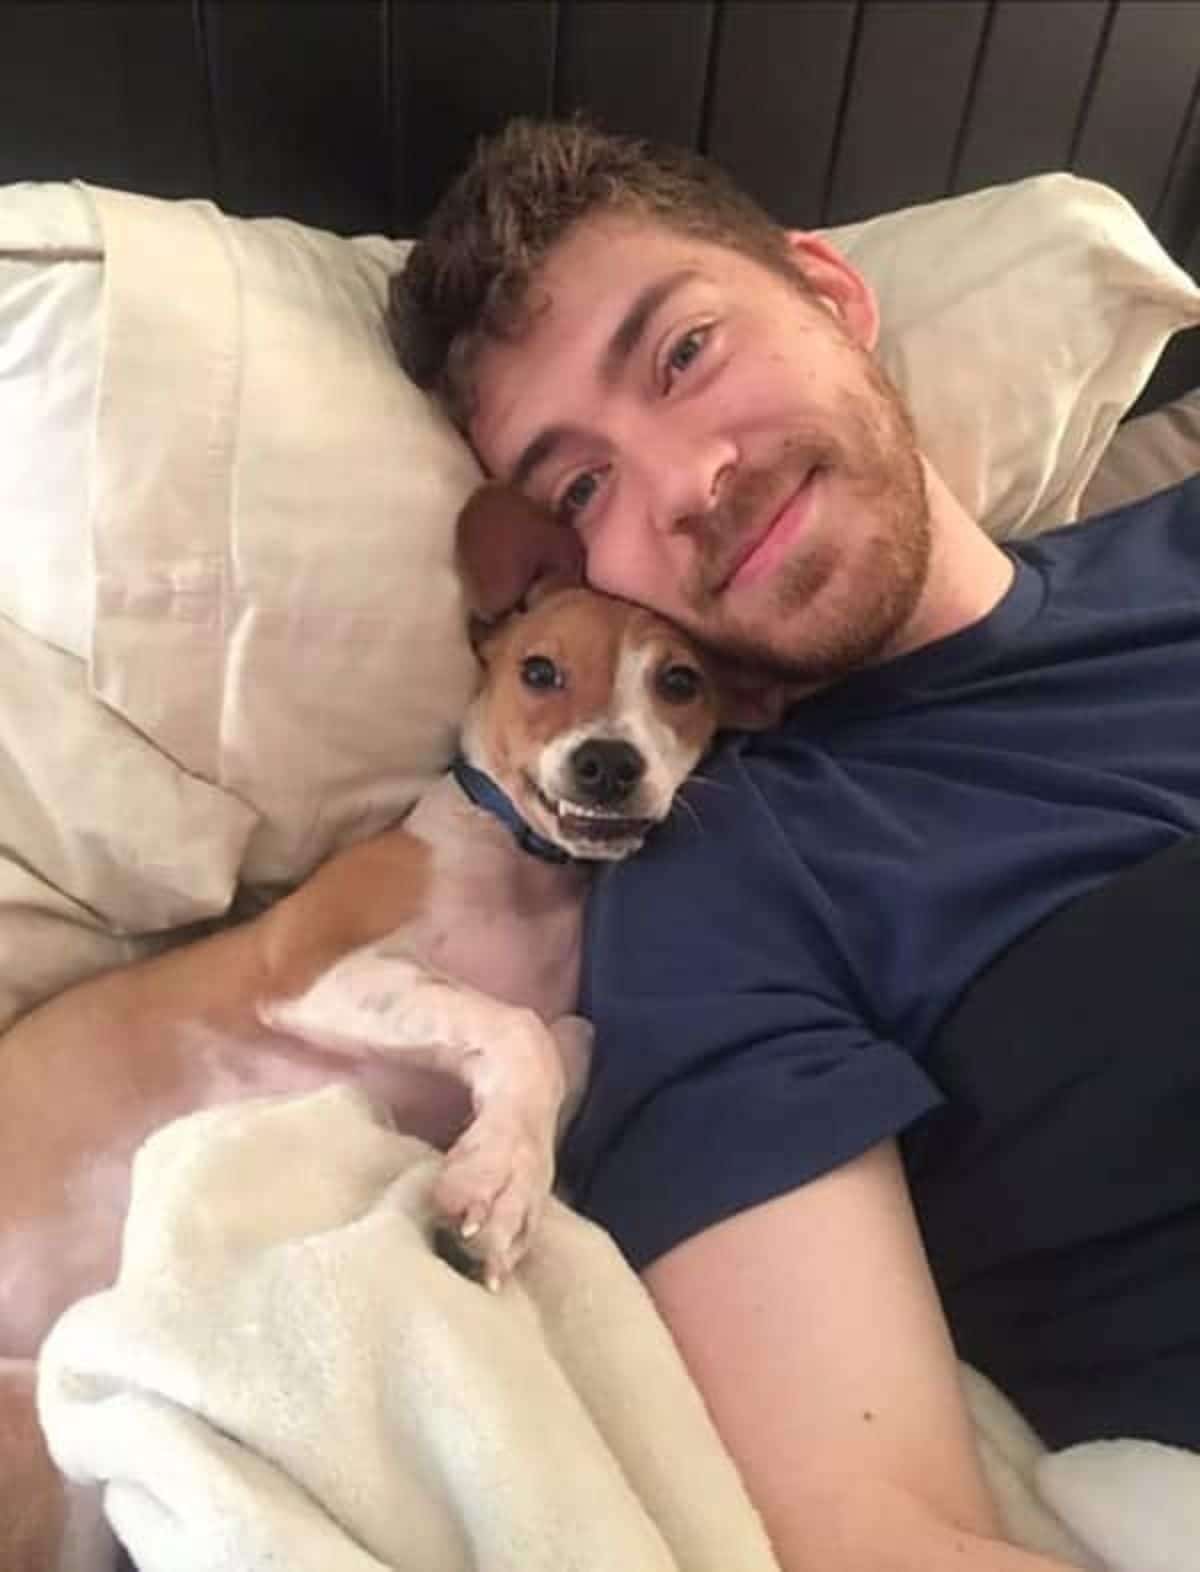 brown and white dog cuddled in bed with a man